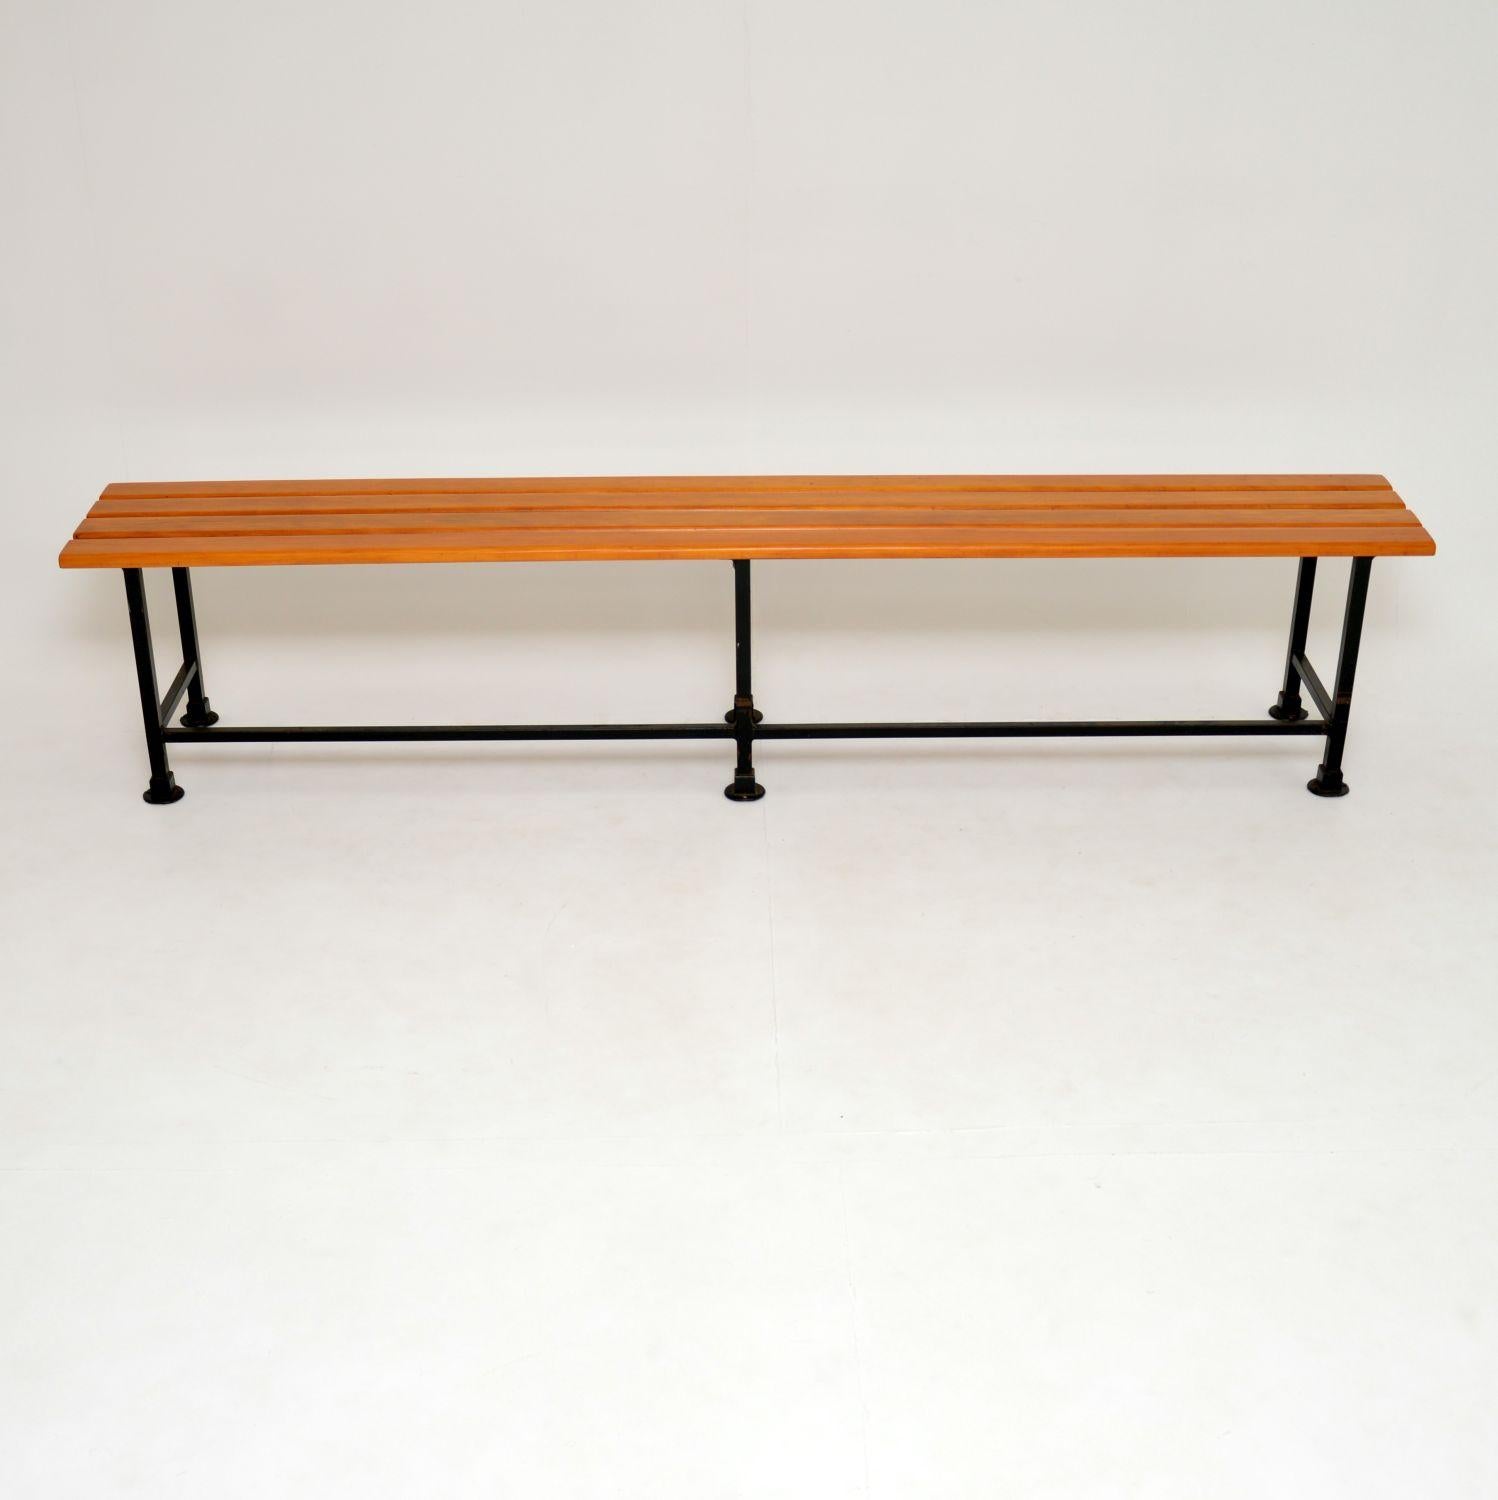 A large and impressive vintage school bench from the 1960s. This is a really nice example, it is of excellent quality and is a great size.

The wood looks like walnut, we have had it stripped and re-polished to a very high standard, it is in